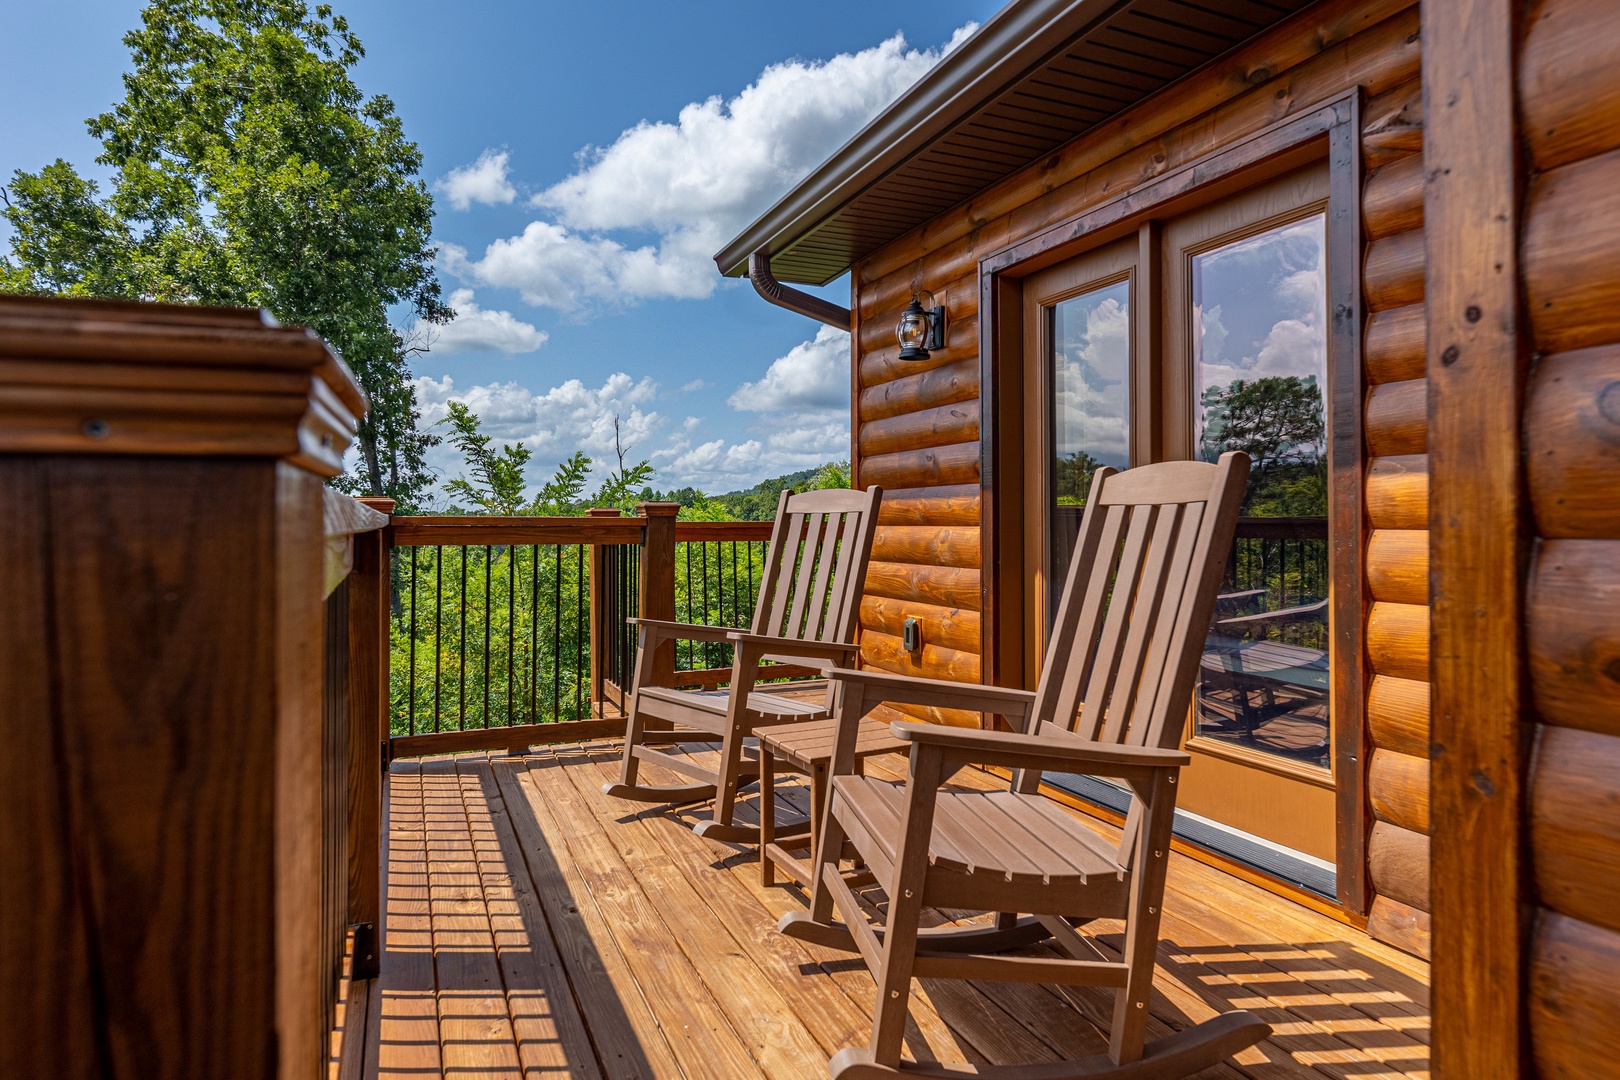 Rocking chairs on the deck at Twin Peaks, a 5 bedroom cabin rental located in Gatlinburg